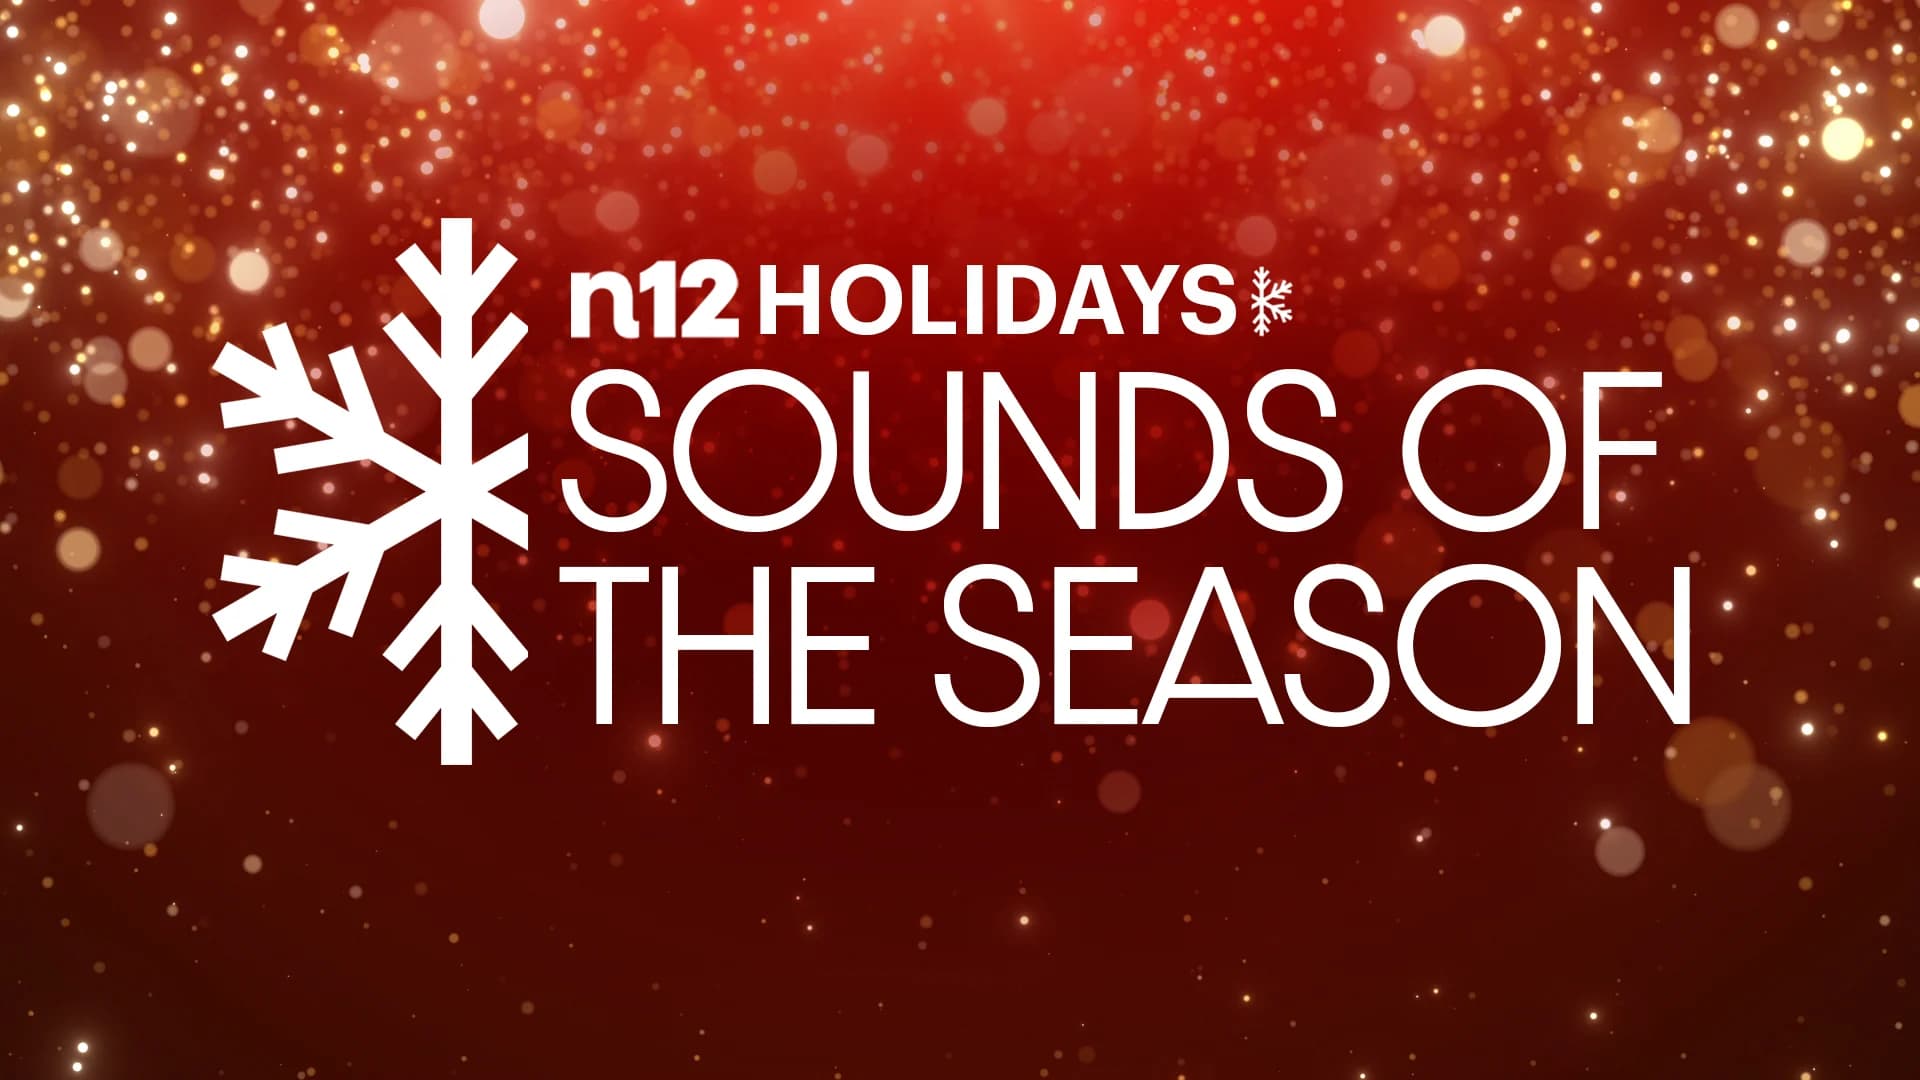 Sounds of the Season winners in the Bronx revealed